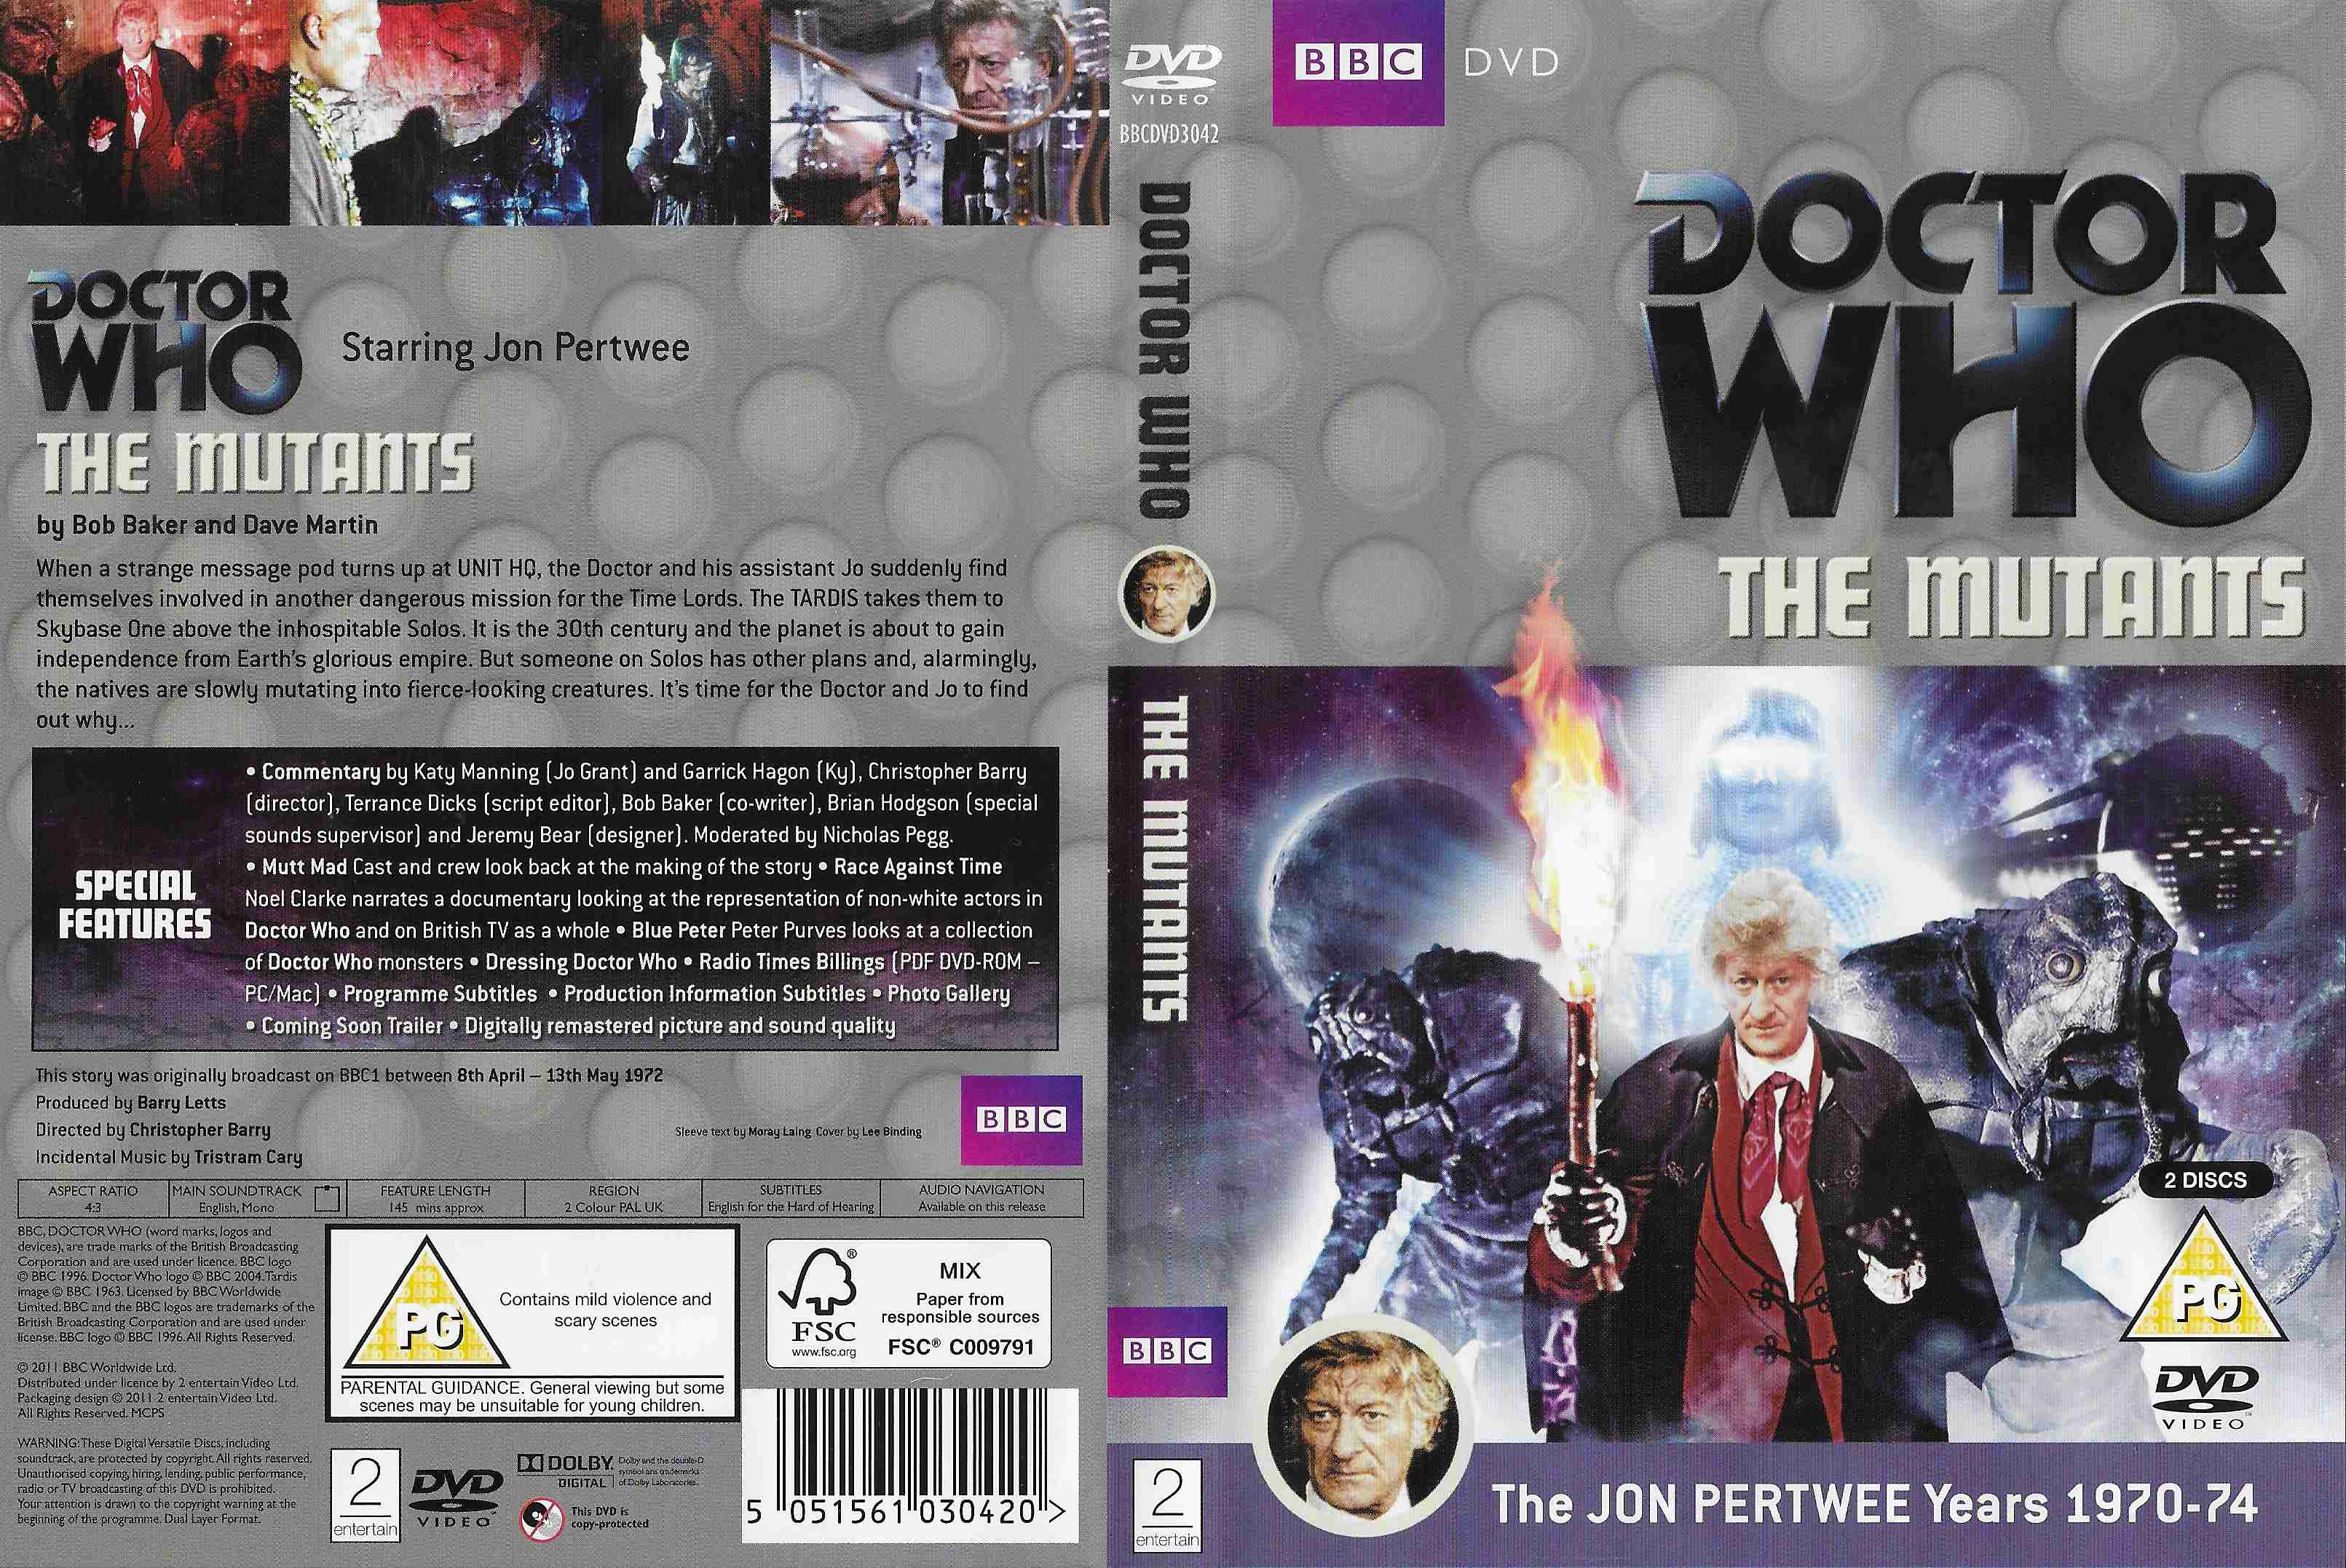 Picture of BBCDVD 3042 Doctor Who - The mutants by artist Bob Baker / Dave Martin from the BBC records and Tapes library